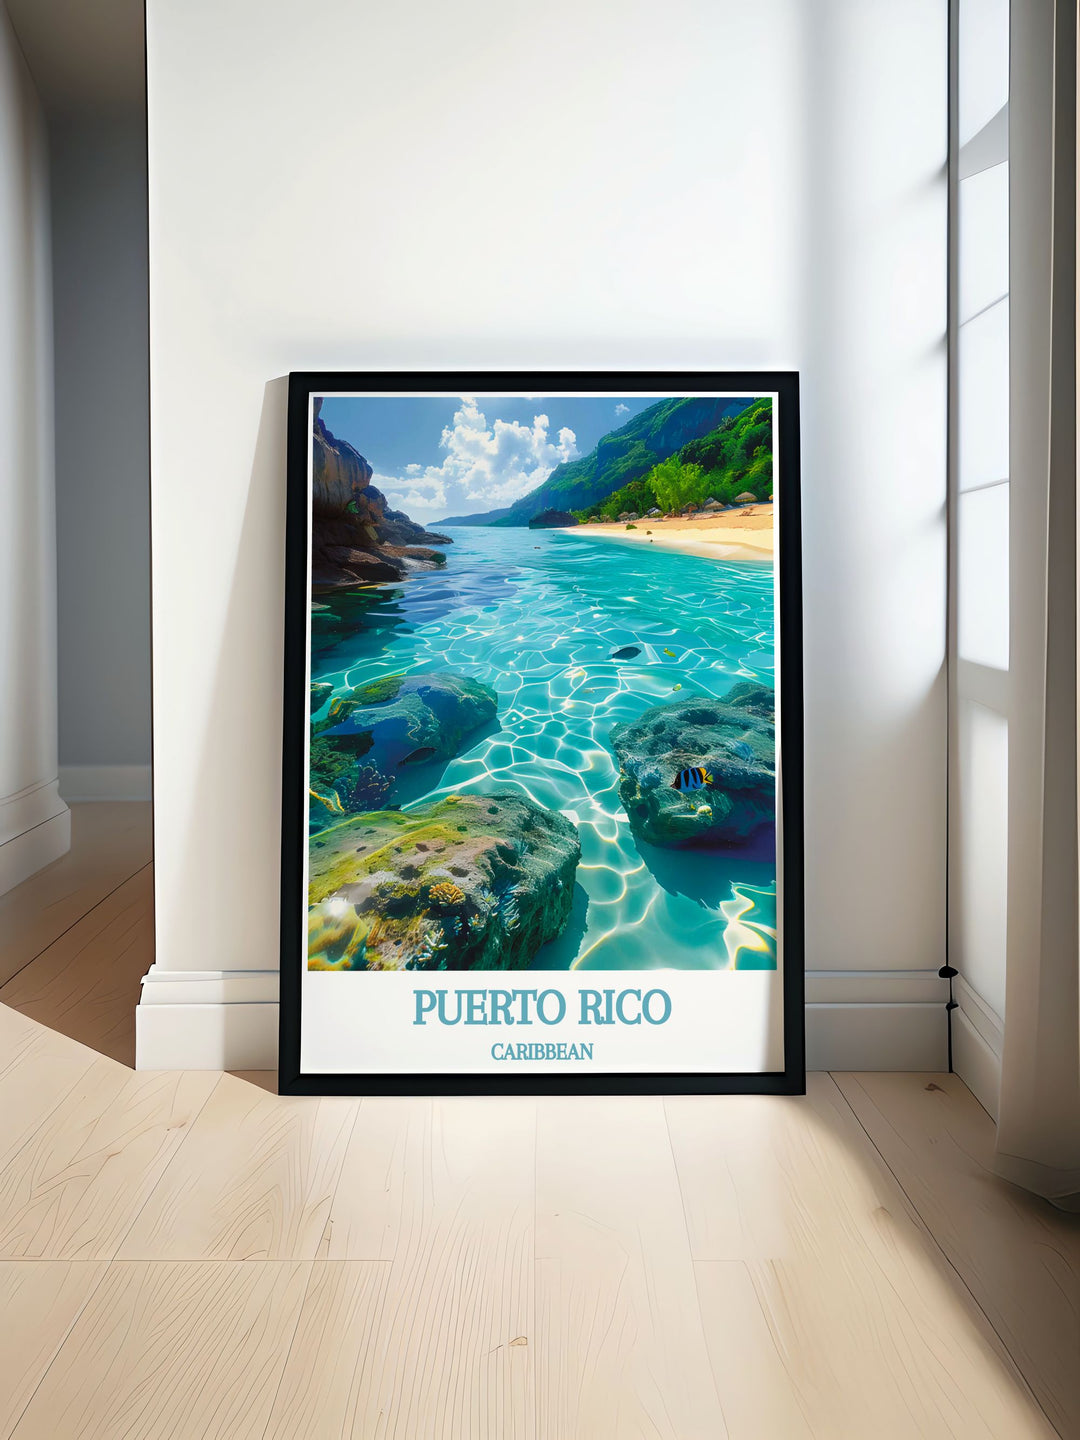 Stunning Puerto Rico poster featuring the iconic CARIBBEAN, Culebra and Vieques Biosphere Reserve with vibrant colors perfect for home decor or gifts. Ideal for those who appreciate Arecibo artwork and travel poster prints with a vintage touch.